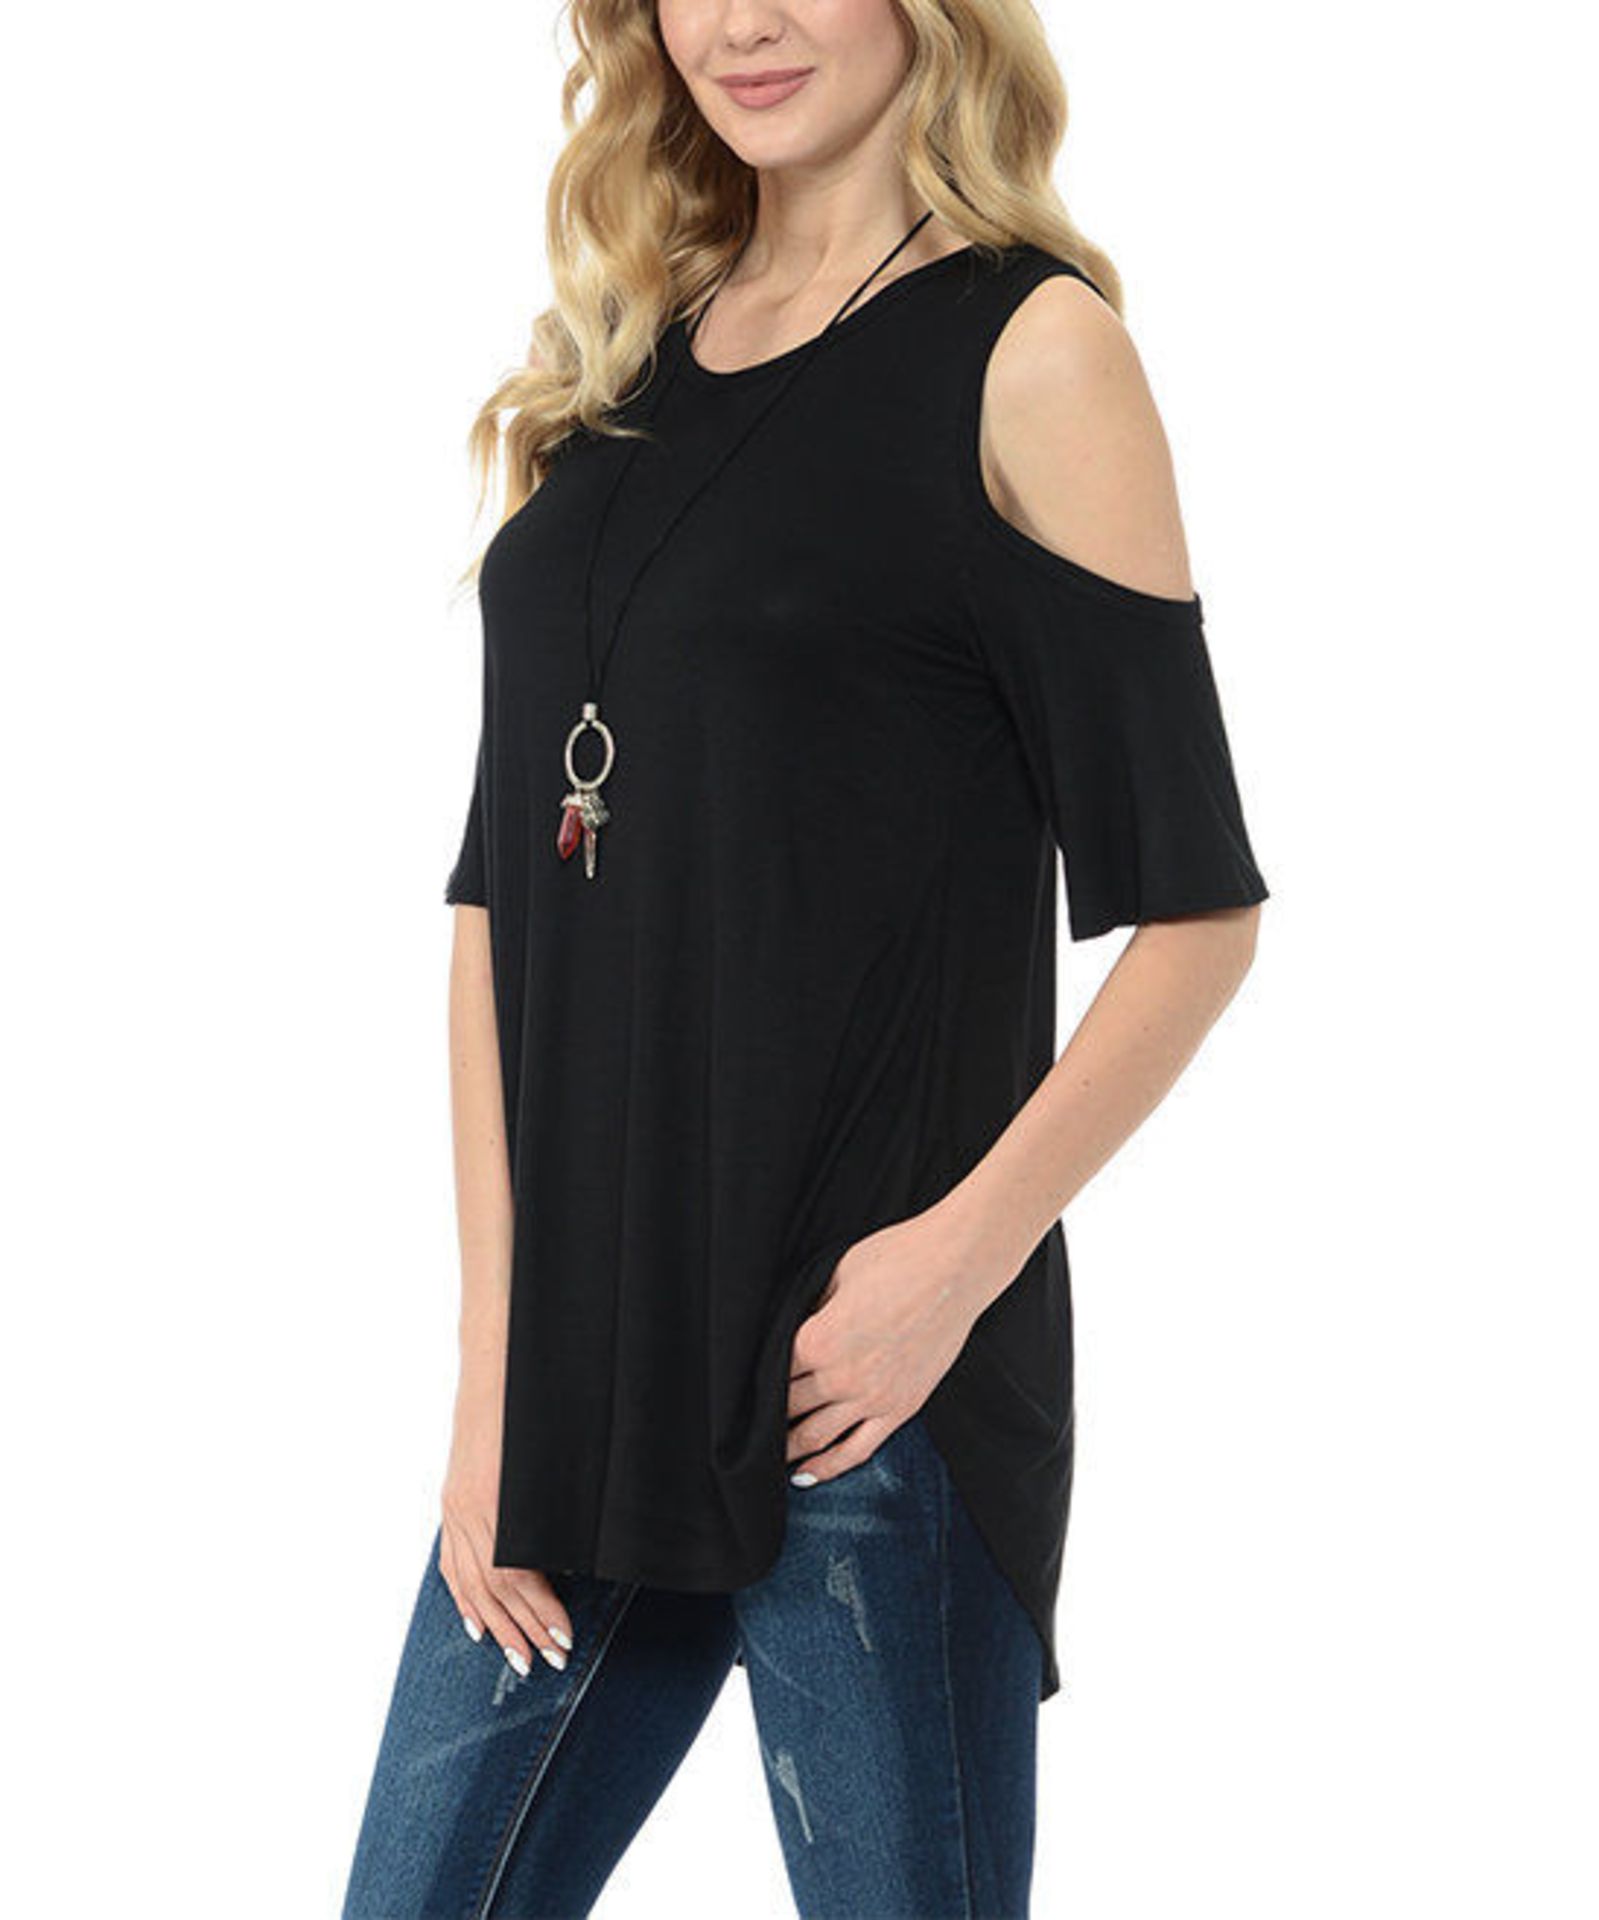 Cool Melon Black Cold-Shoulder Top (Us 18/Uk 22/Eu 50) (New With Tags) [Ref: 46366634-T-54]